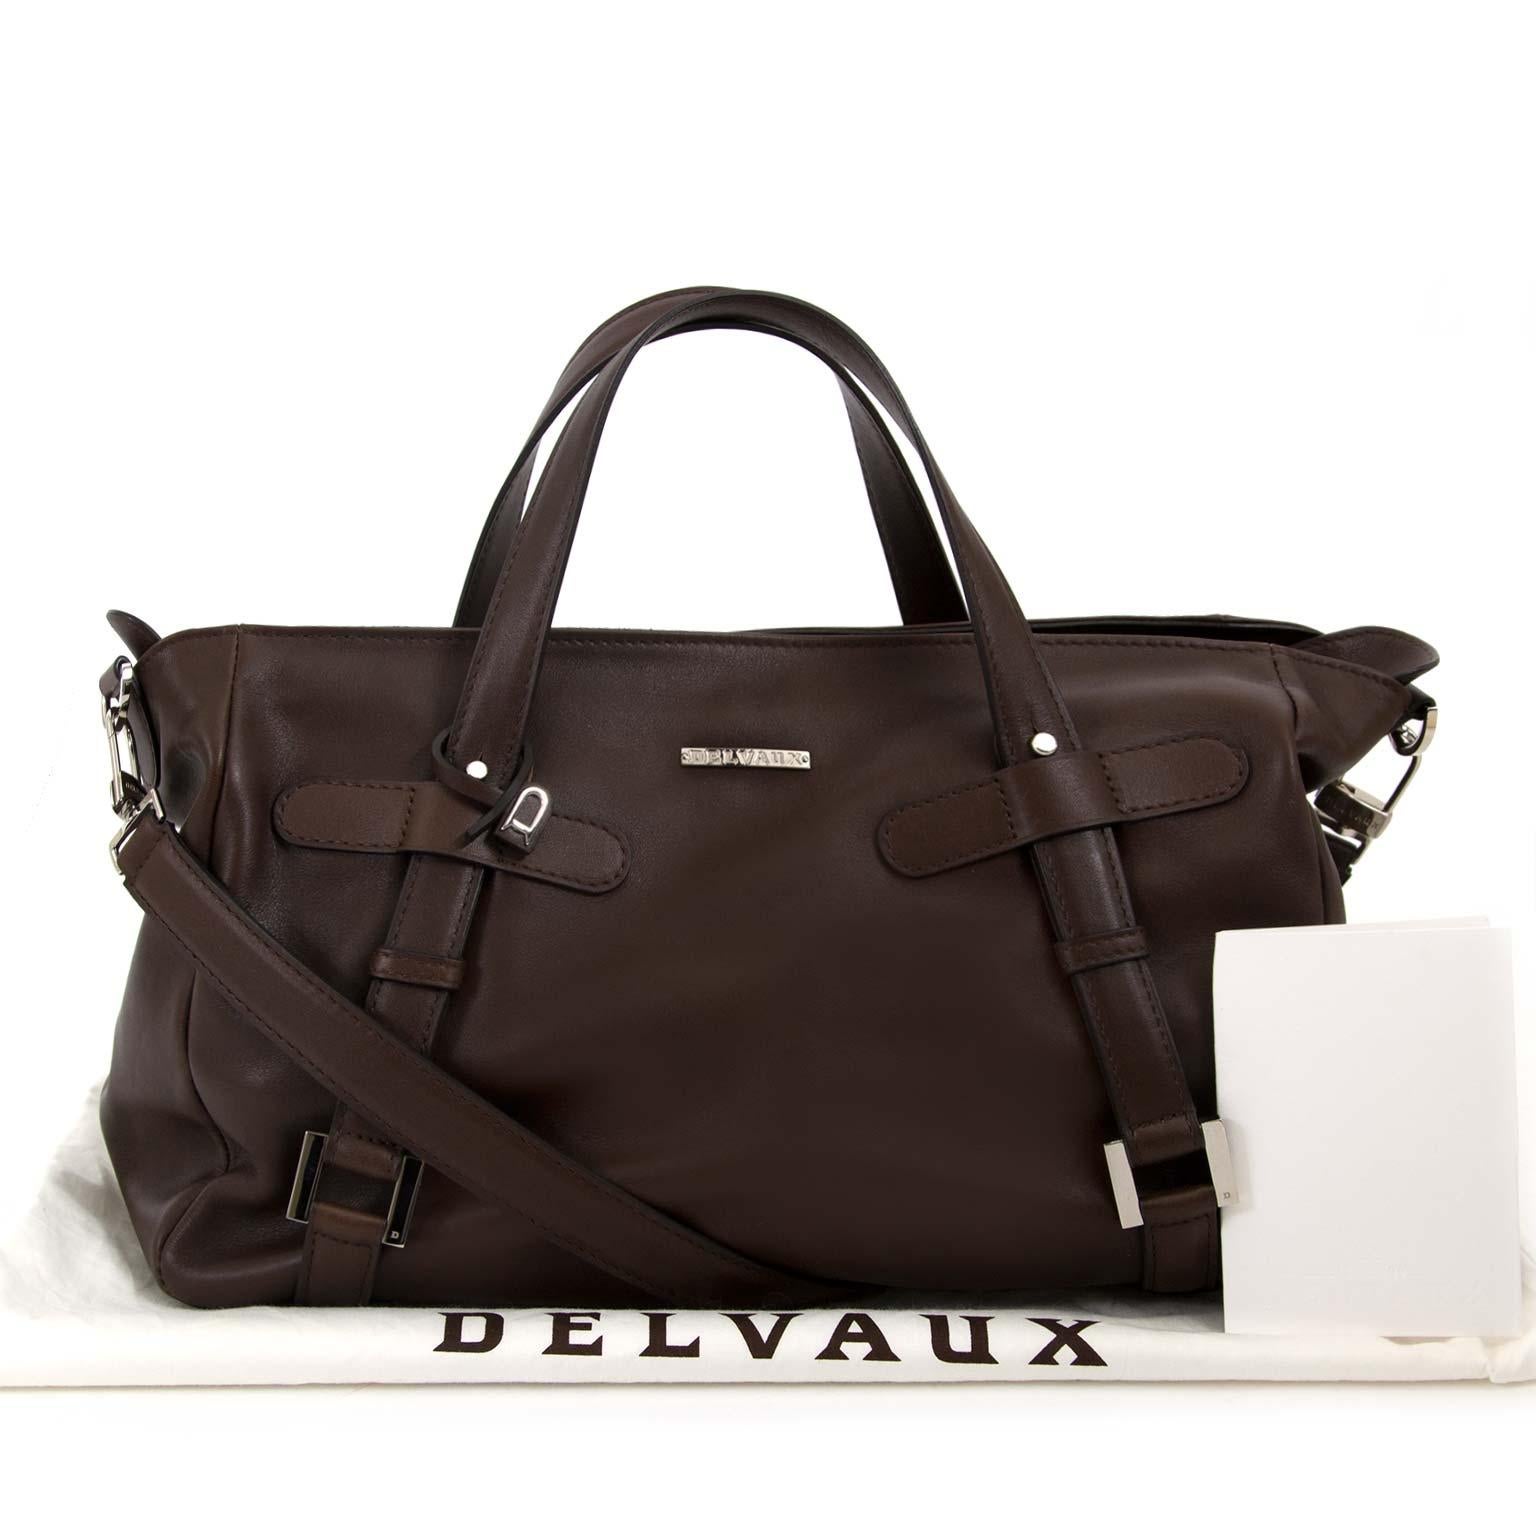 Excellent condition

Delvaux Brown Saint Germain Bag 

Add some elegance to your everyday outfit with this timeless Saint Germain bag by Delvaux. 
This marvelous top handle bag is crafted from brown leather and features silver-tone hardware. 
The